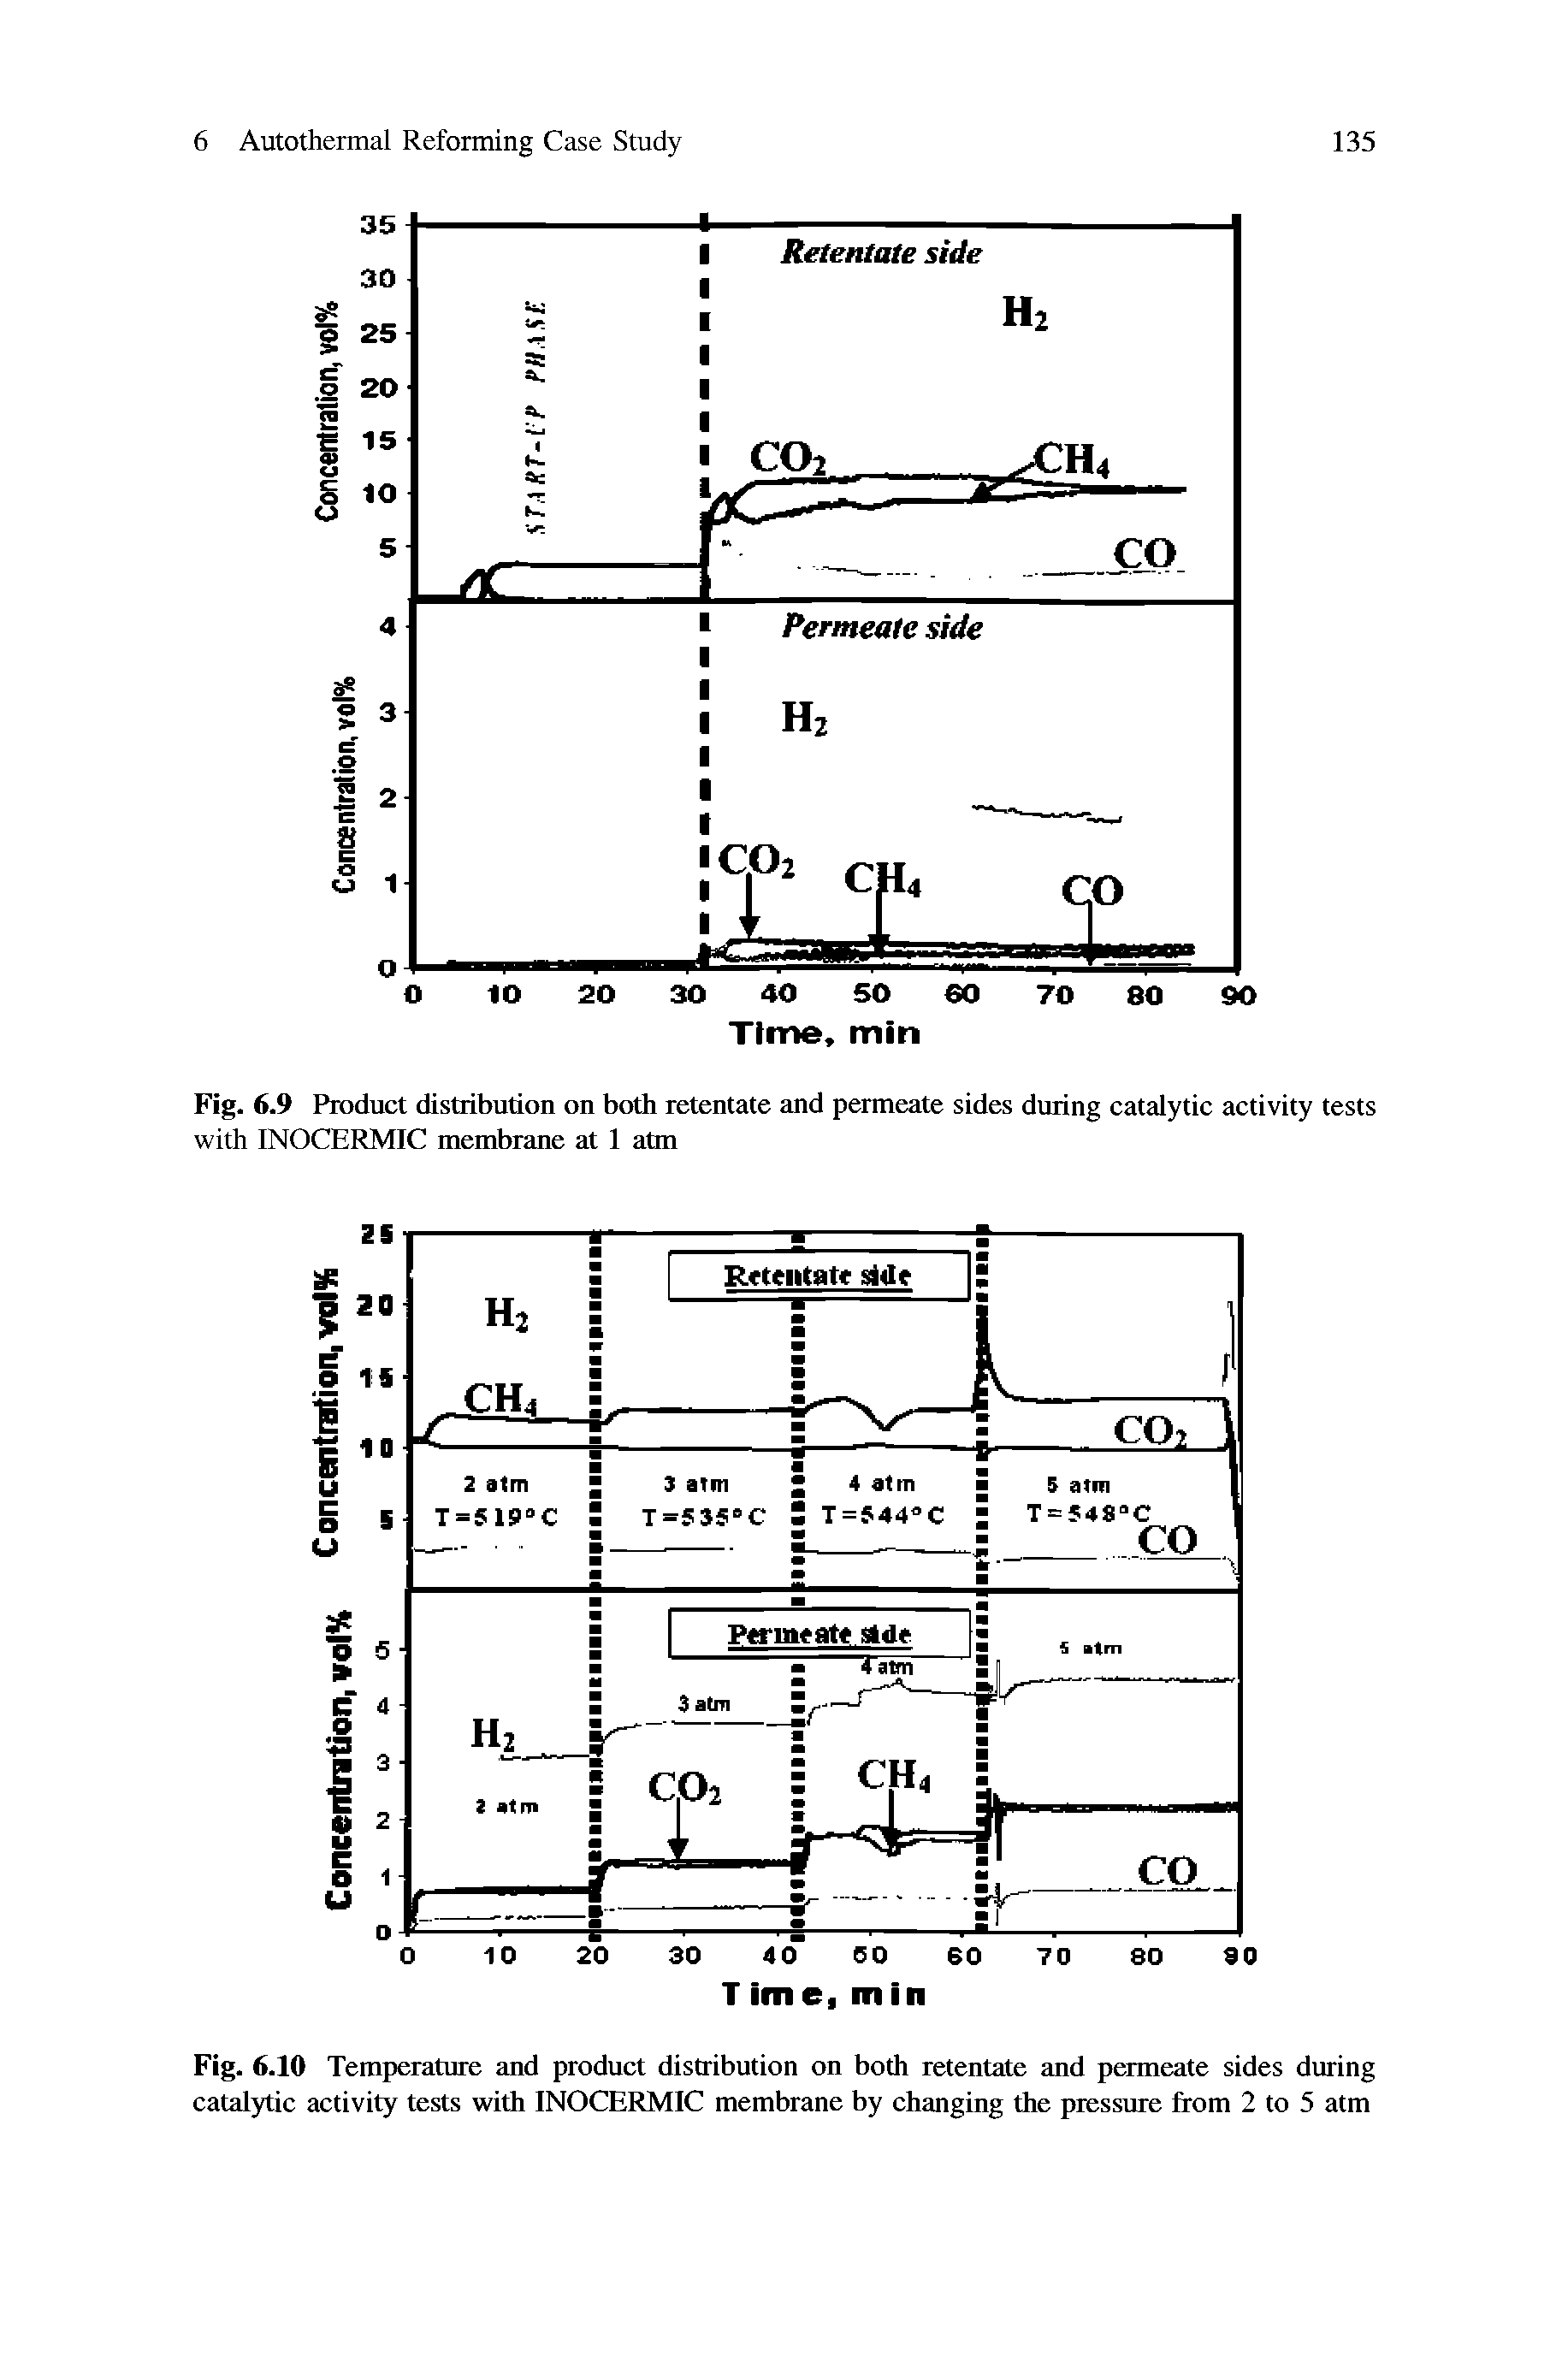 Fig. 6.10 Temperature and product distribution on both retentate and permeate sides during catalytic activity tests with INOCERMIC membrane by changing the pressure from 2 to 5 atm...